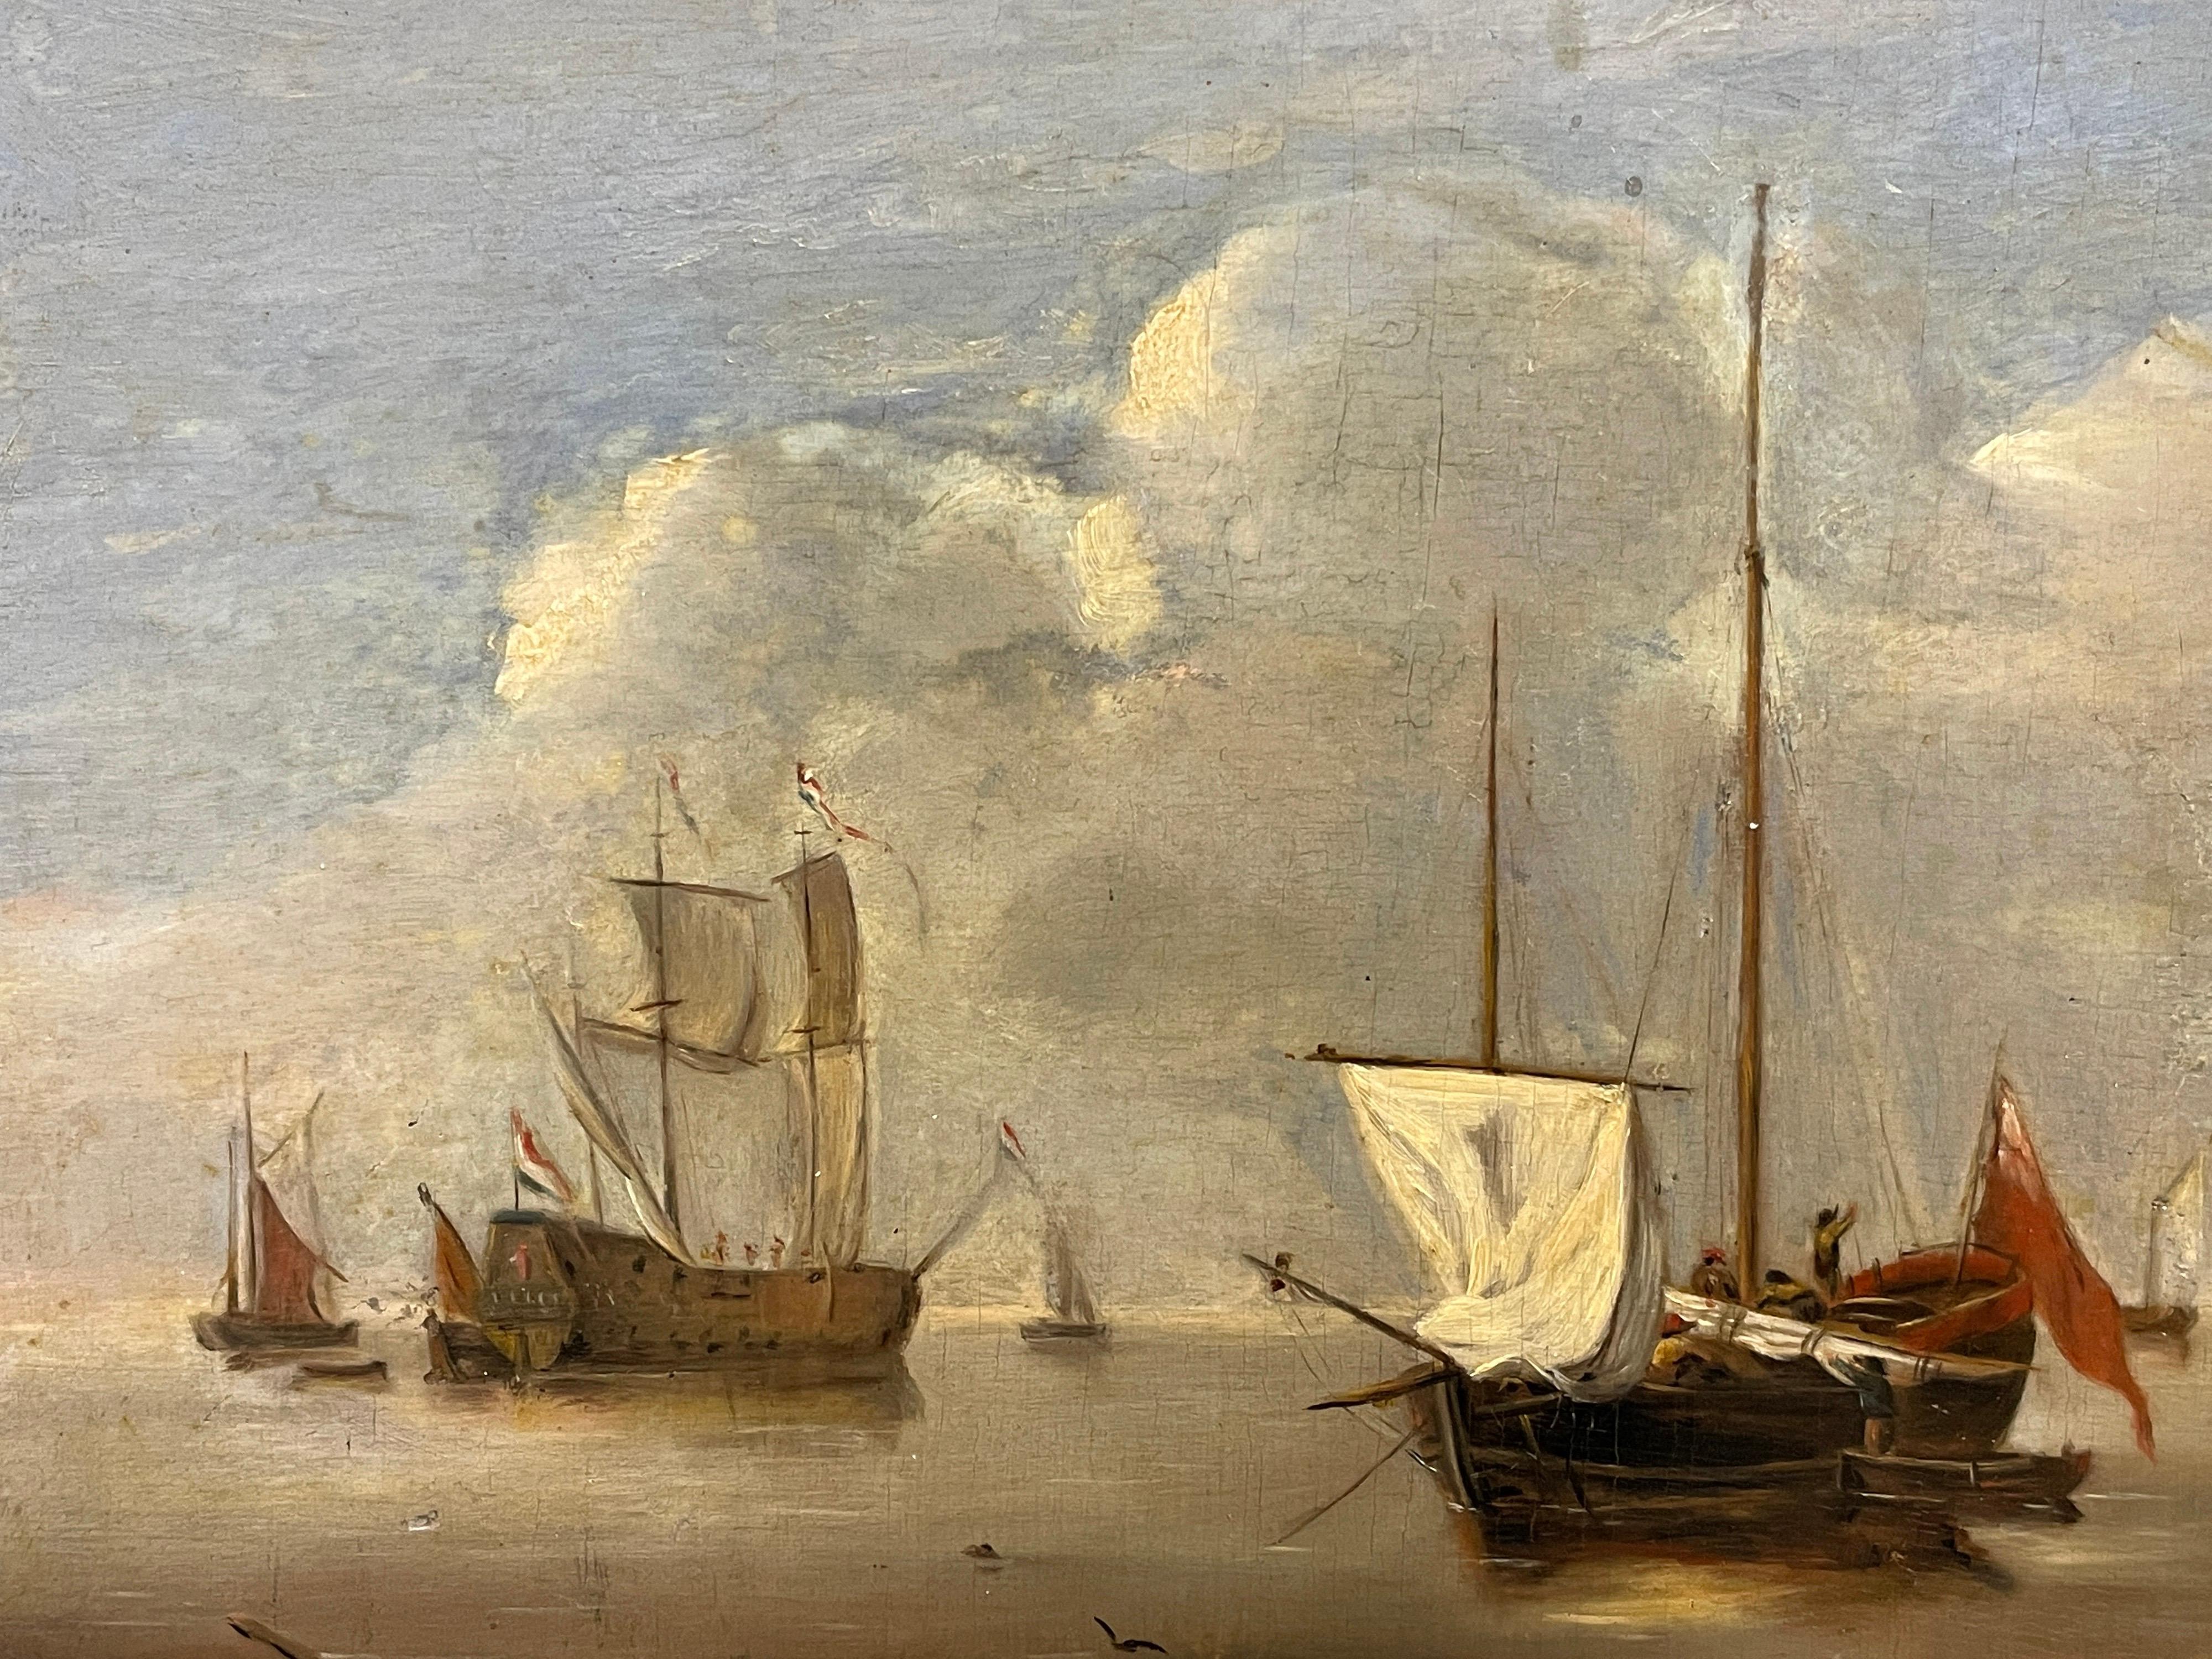 Shipping in Calm Waters, 18th Century Dutch Oil on Wood Panel, Man o War - Brown Landscape Painting by Dutch 18th